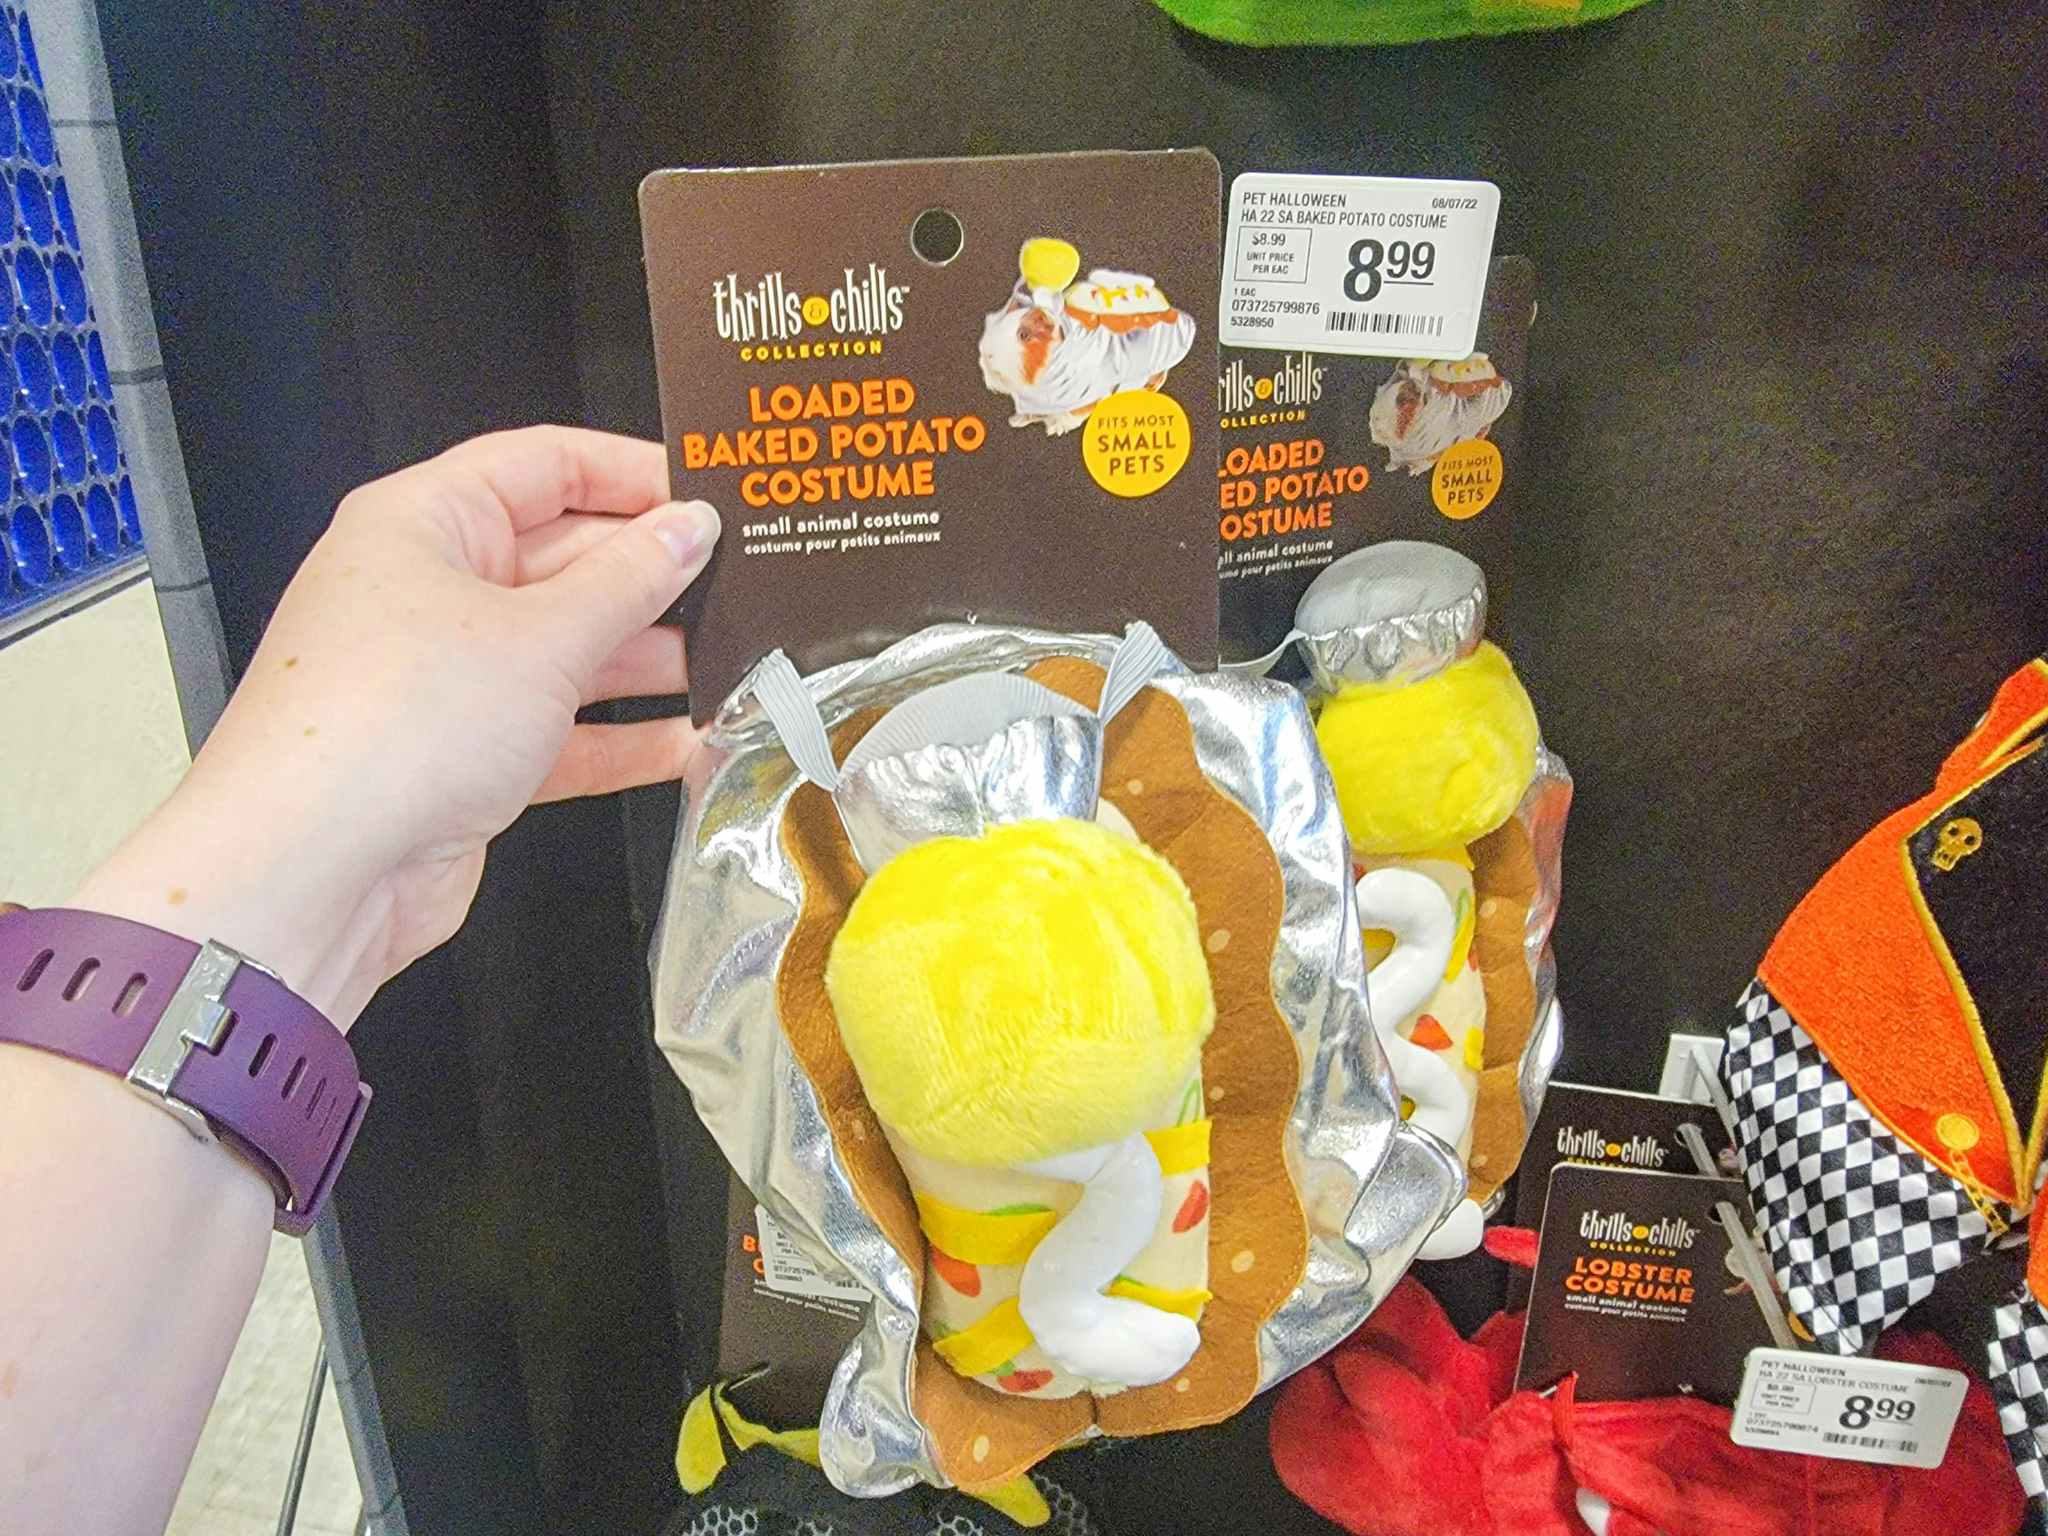 hand holding a loaded baked potato costume for small pets